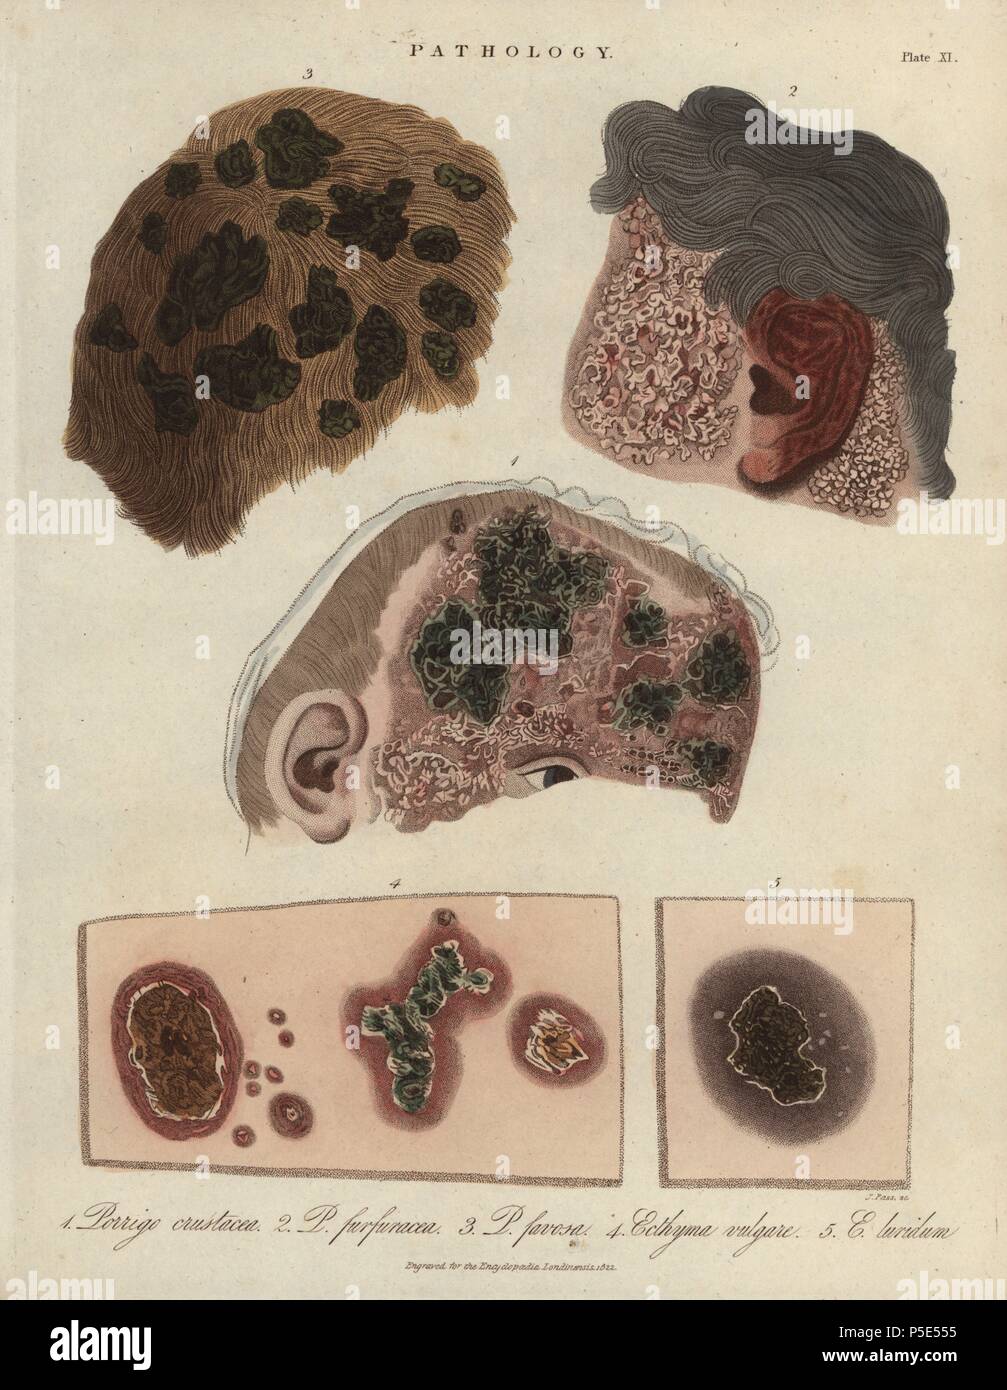 Scalp diseases Porrigo crustacea and P. furfuracea, and skin diseases Ecthyma vulgaris and E. luridum, ulcerative pyoderma of the skin caused by bacteria such as Streptococcus pyogenes. Handcoloured copperplate stipple engraving by John Pass from John Wilkes' 'Encyclopedia Londinensis,' J. Adlard, London, 1822. Stock Photo